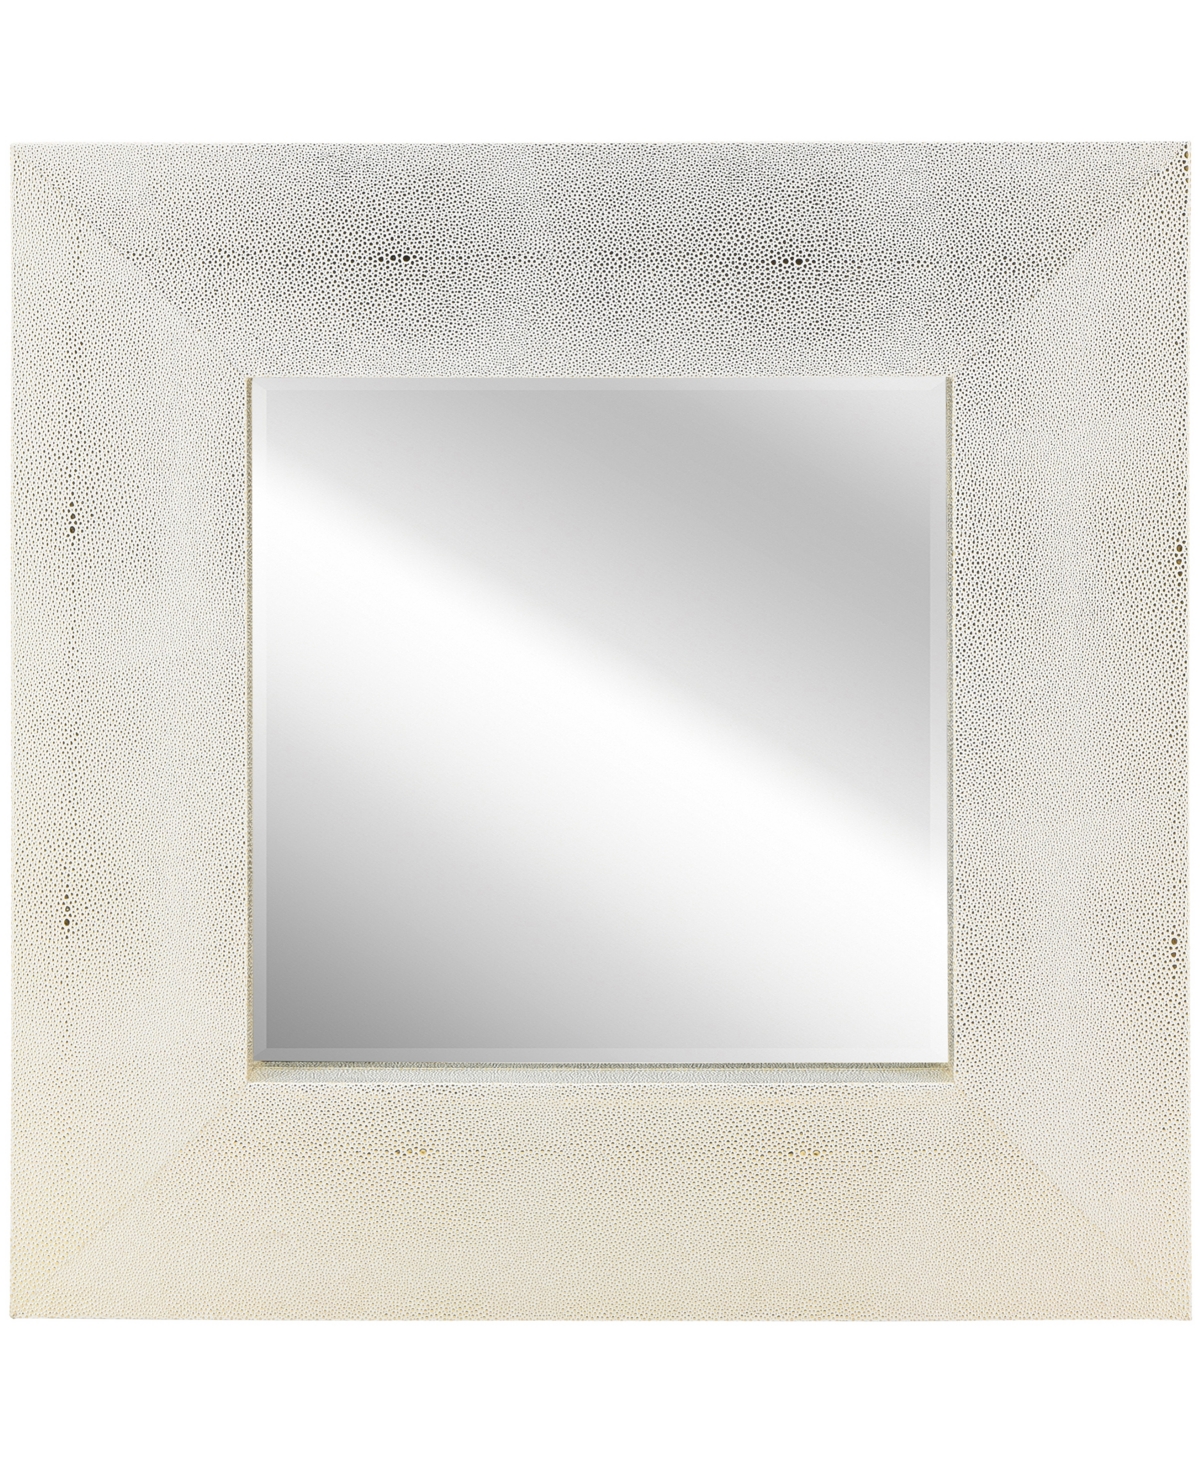 Beveled Wall Mirror Metallic Faux Shagreen Leather Framed Leaner, 30" x 30" x 3" - White